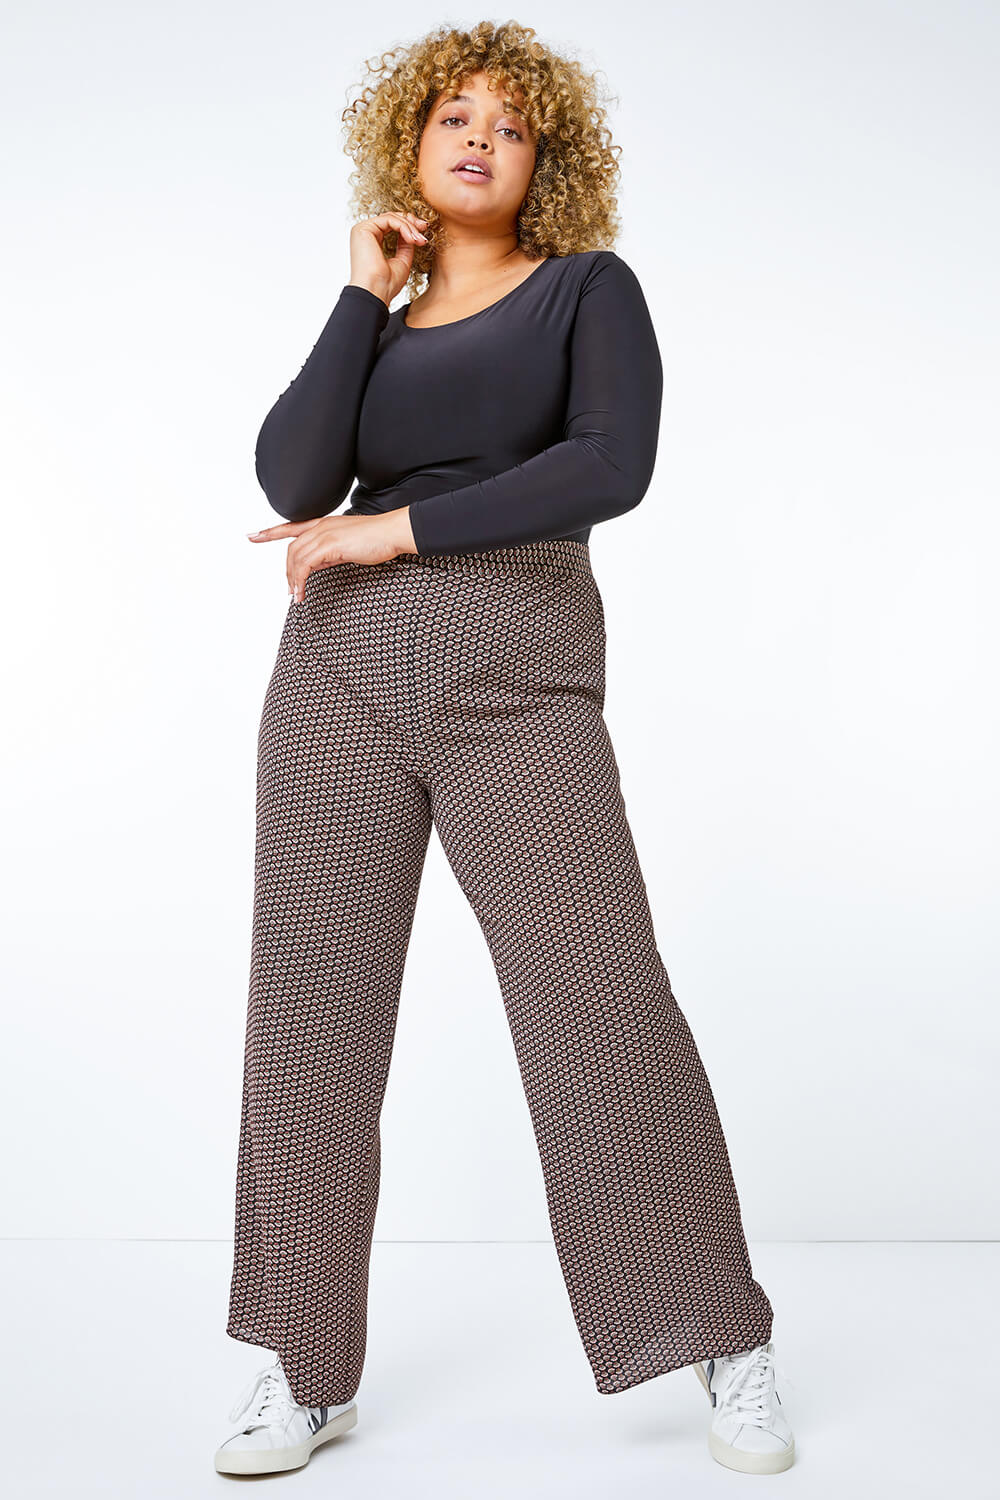 Mocha Curve Printed Wide Leg Trousers, Image 2 of 5